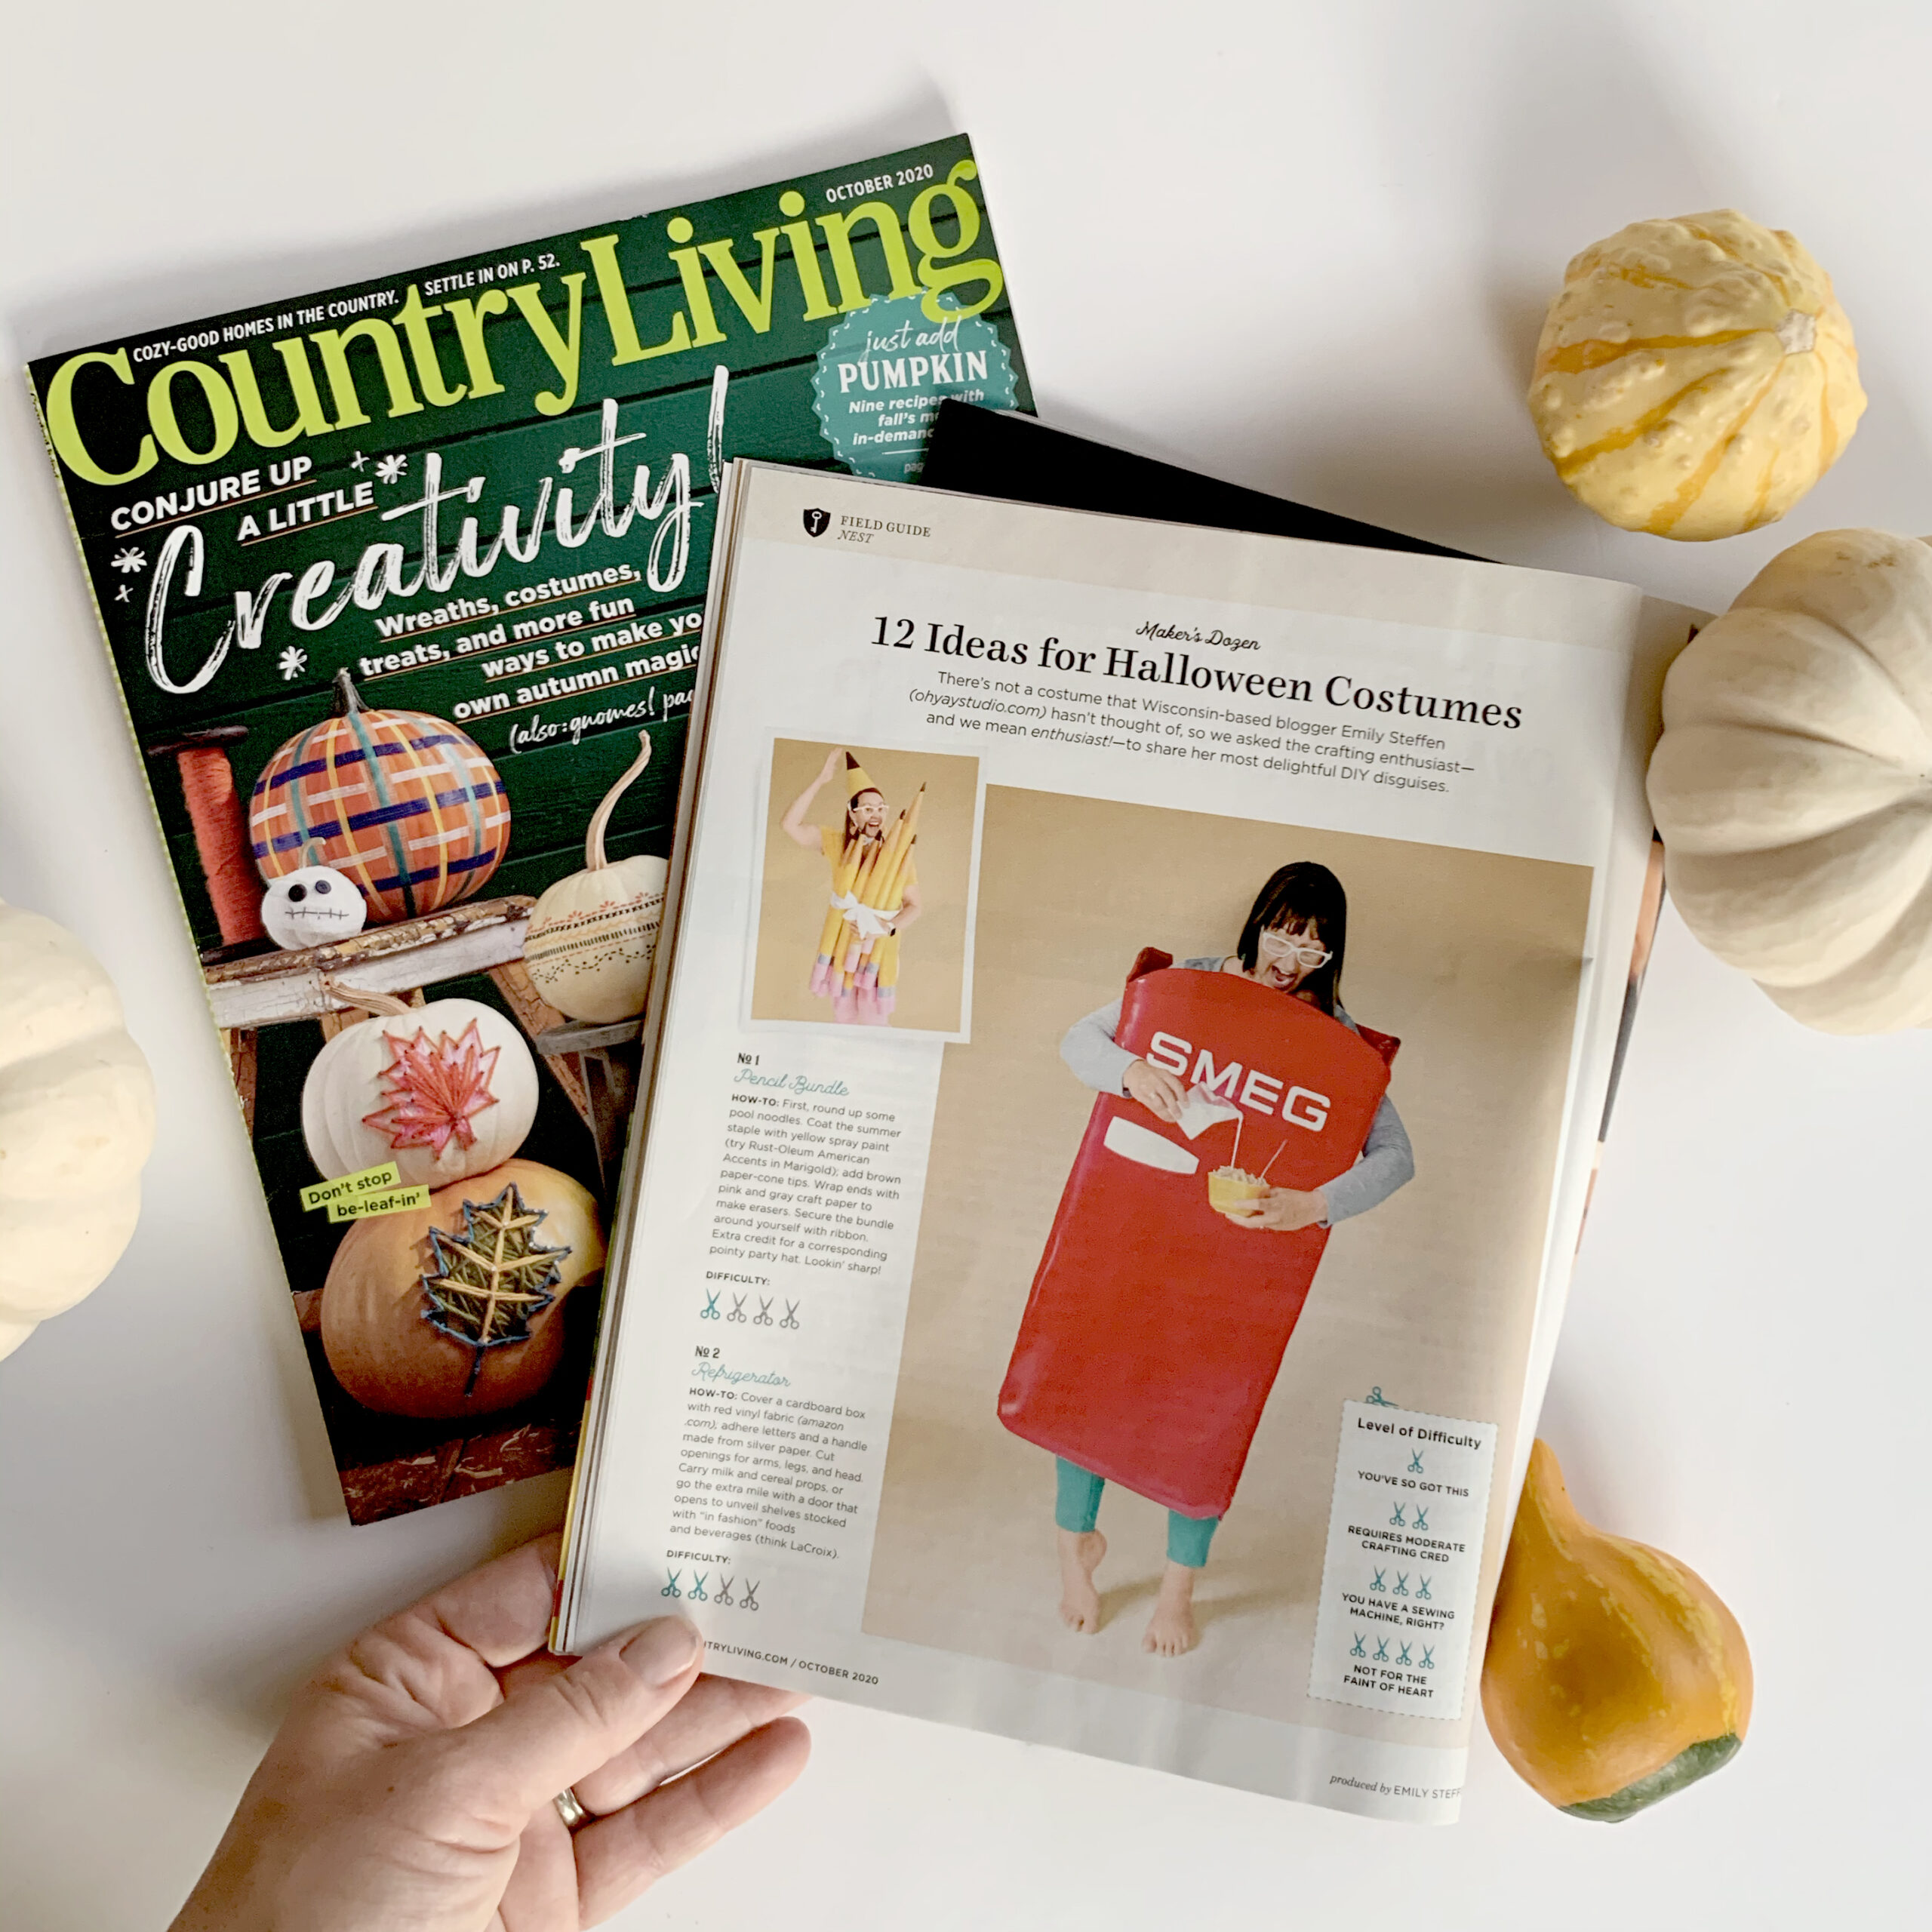 My face in Country Living Magazine + my family memories!